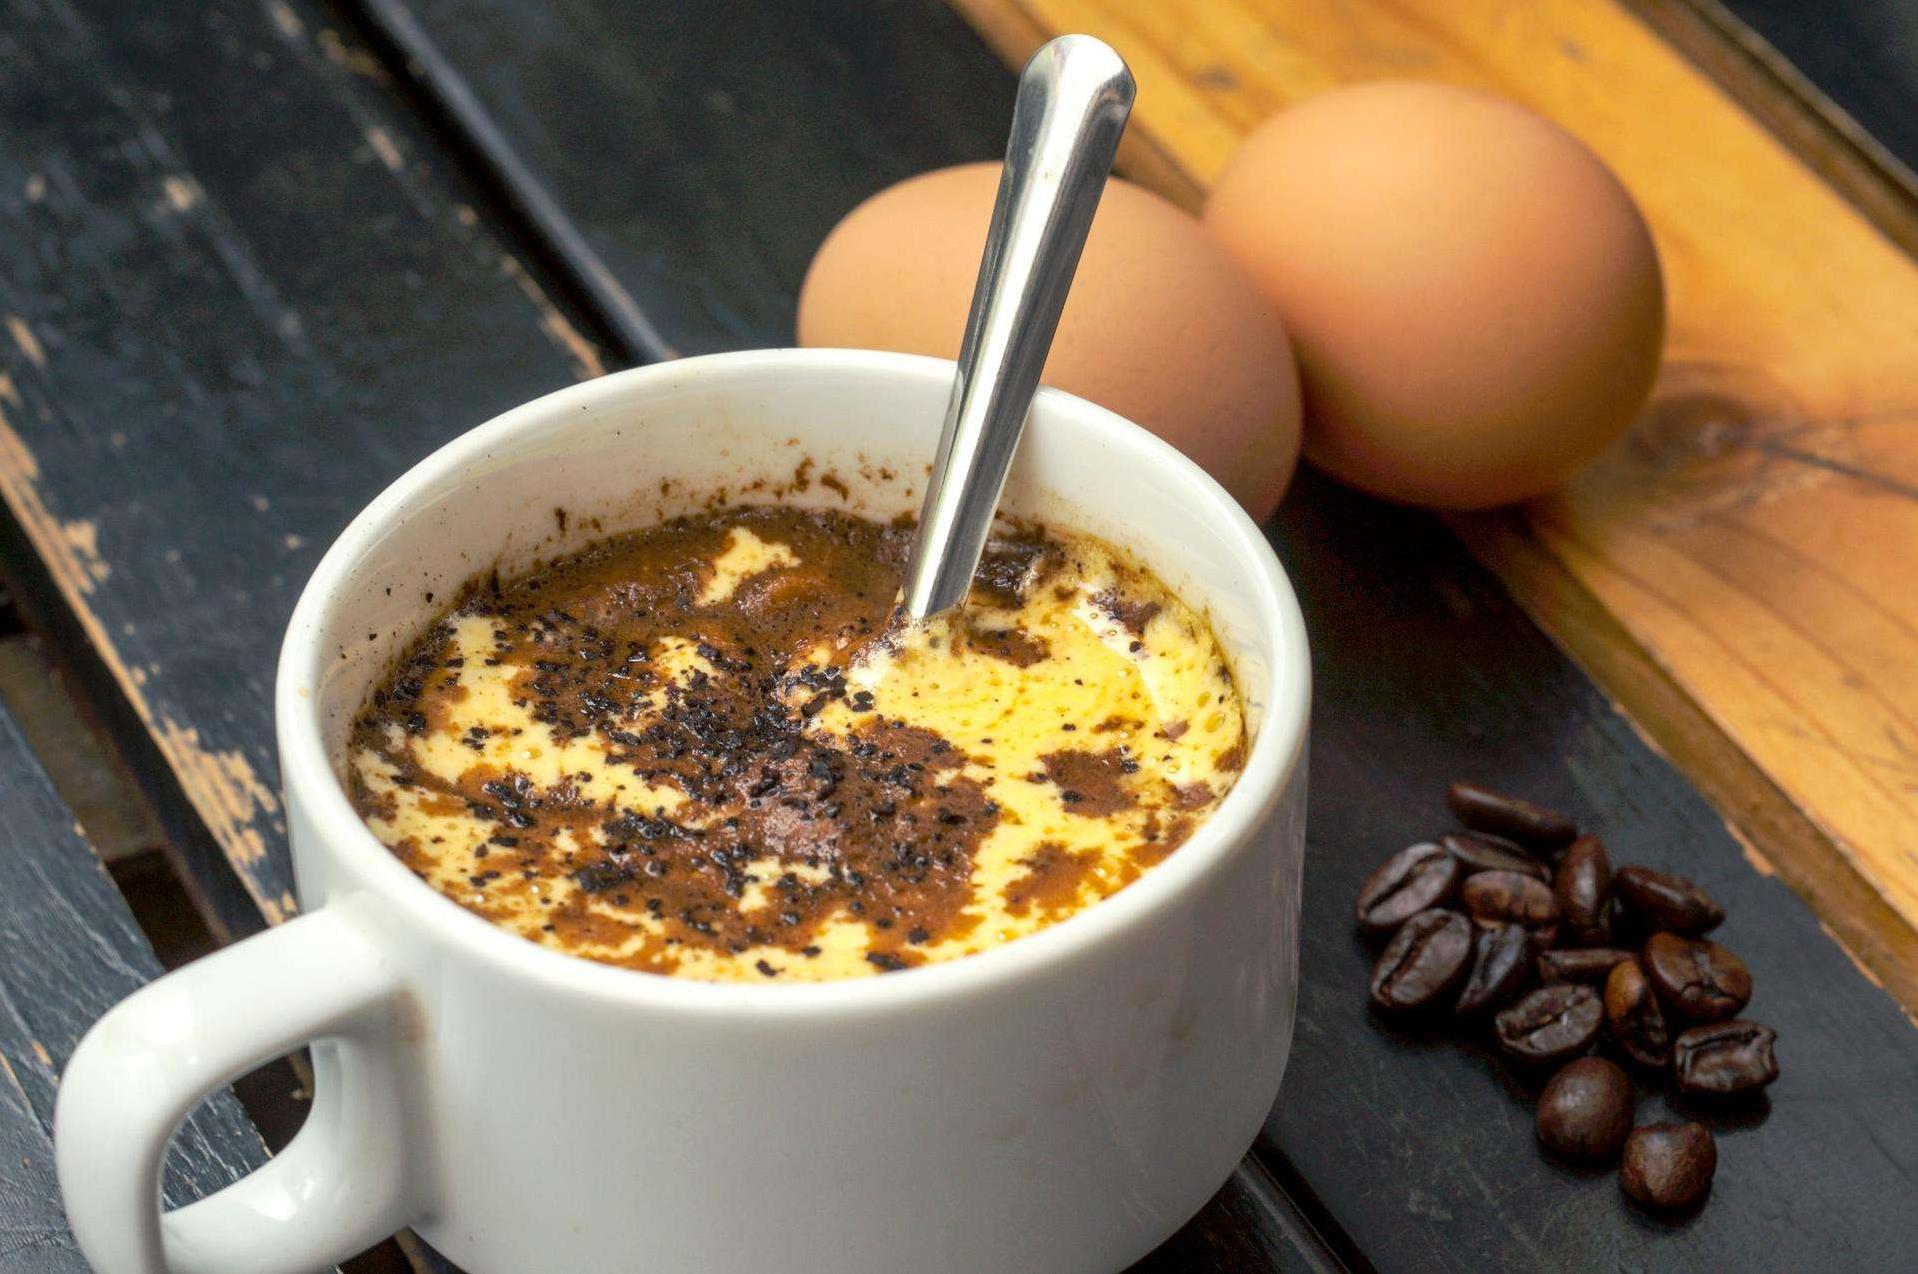  The eggs add richness and texture to the coffee, making it a real indulgence.